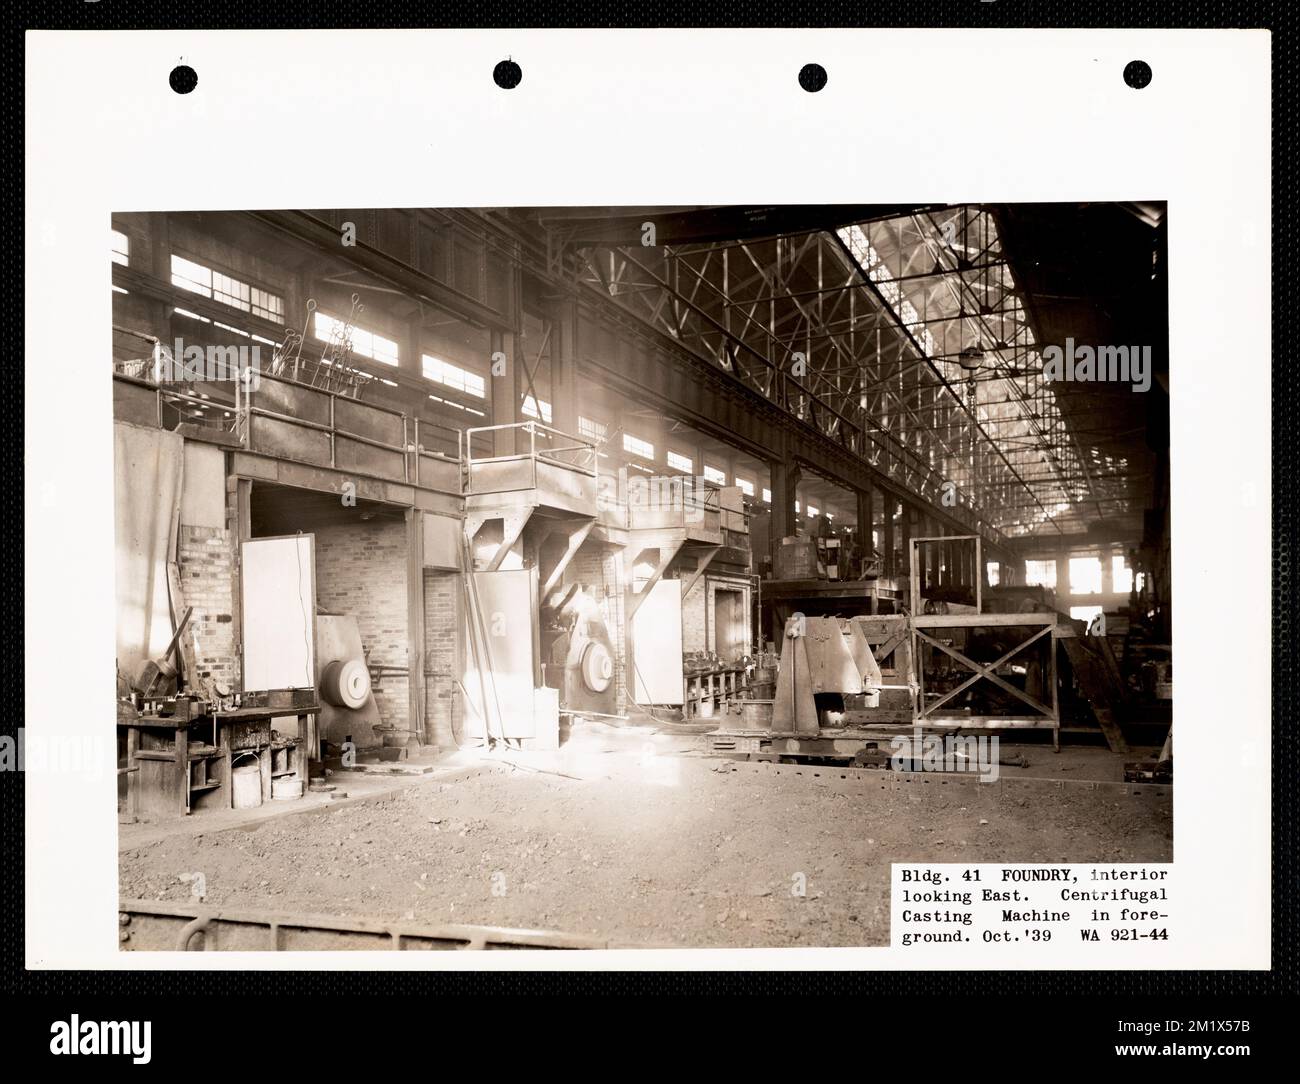 Bldg. 41 foundry, interior looking east, centrifugal casting machine in foreground , Armories, Foundries, Watertown Arsenal Mass..  Records of U.S. Army Operational Stock Photo